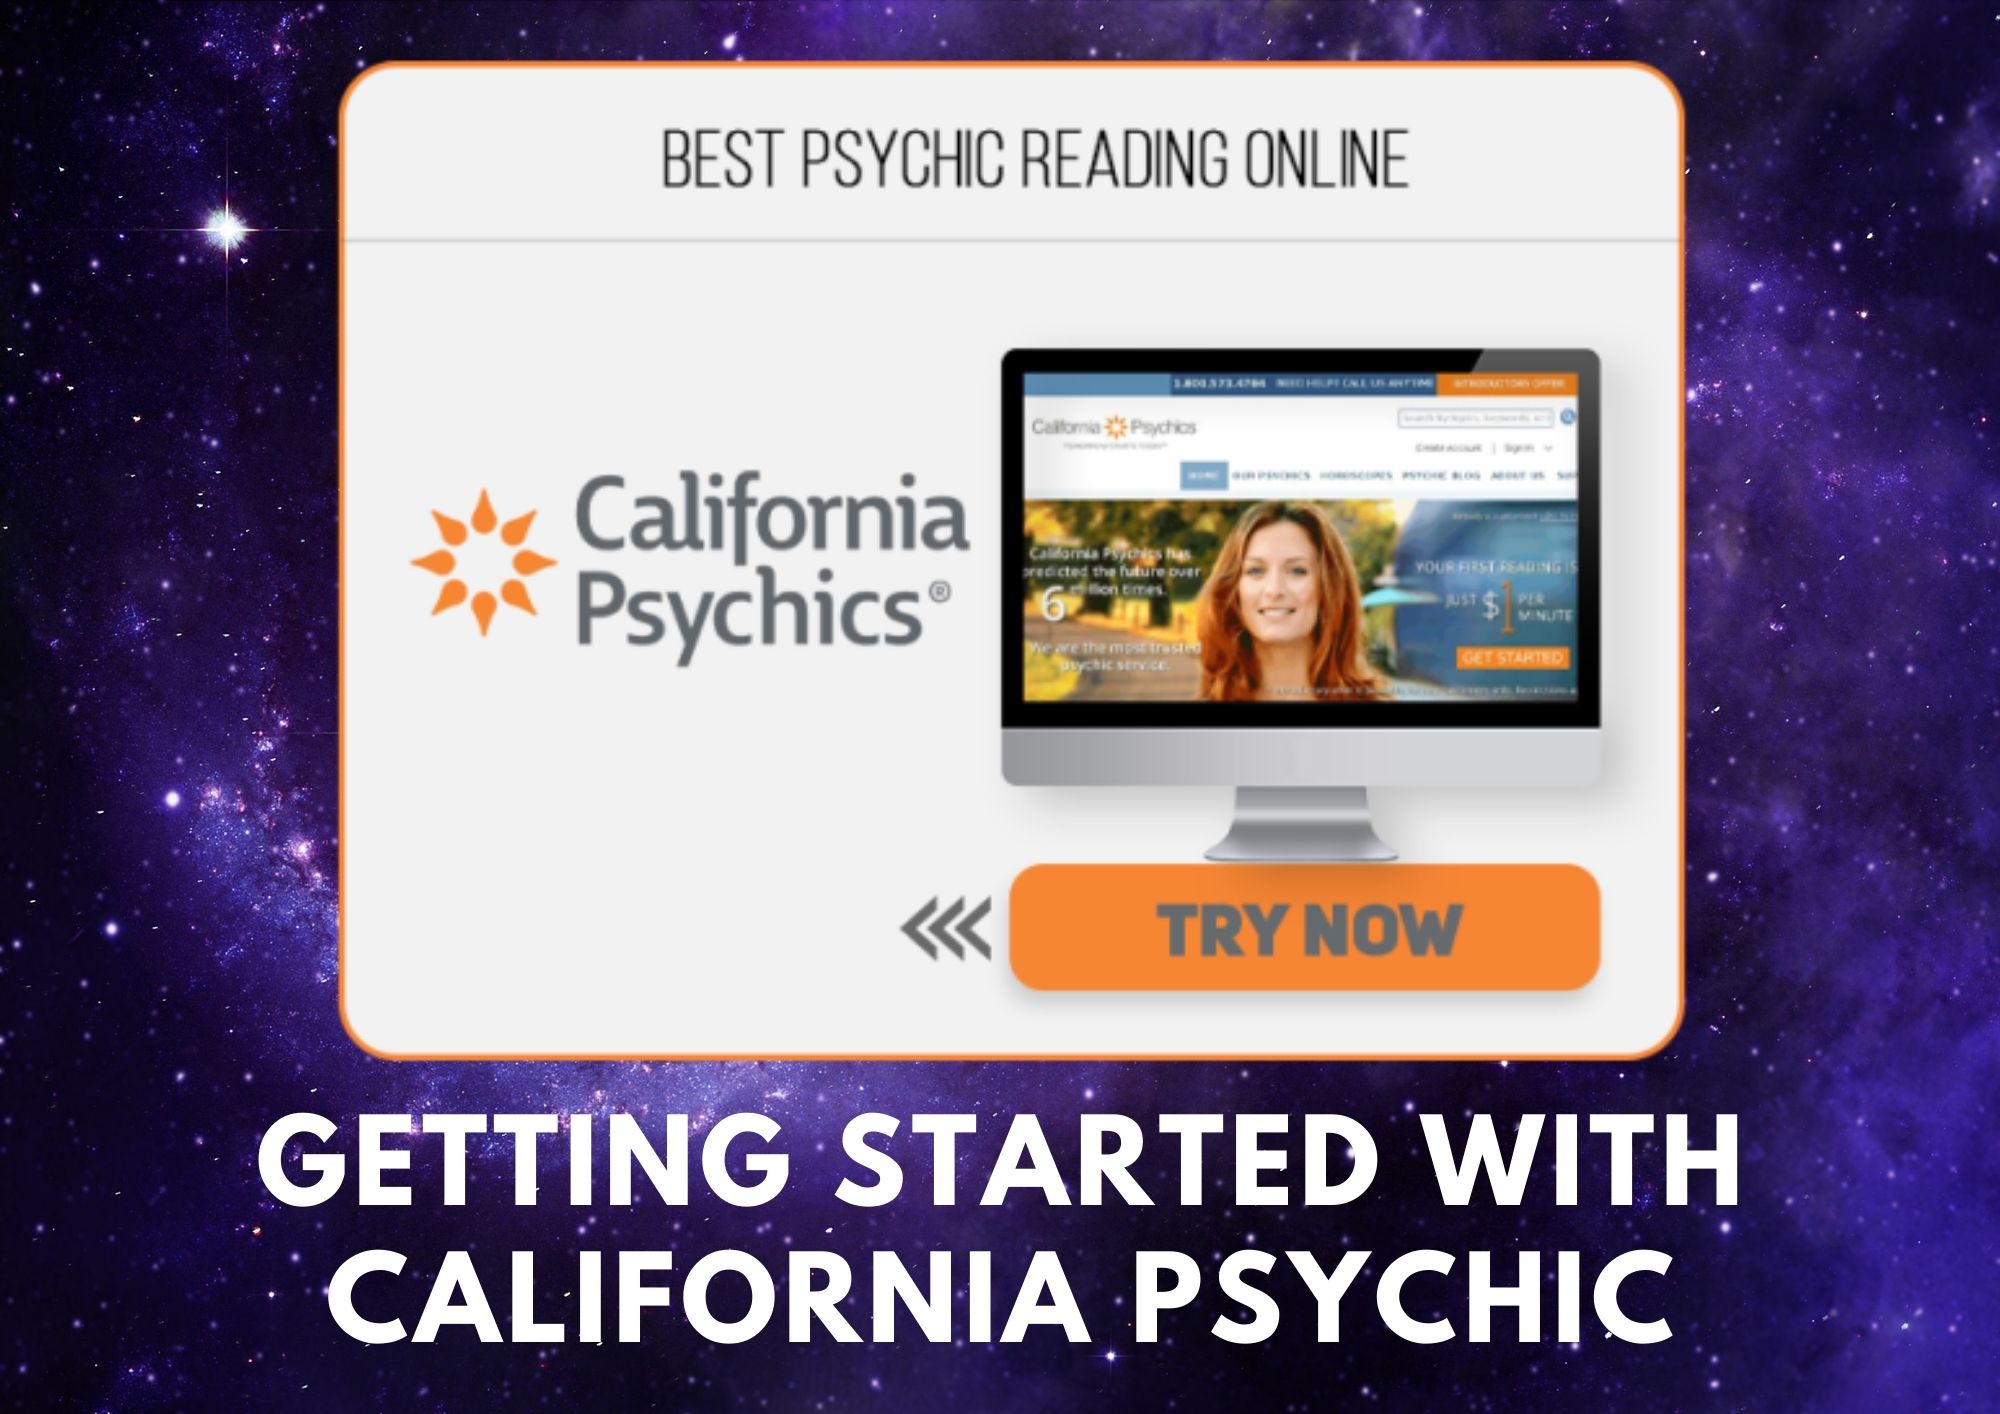 California psychic logo on the left side and a monitor showing california web page on the right side